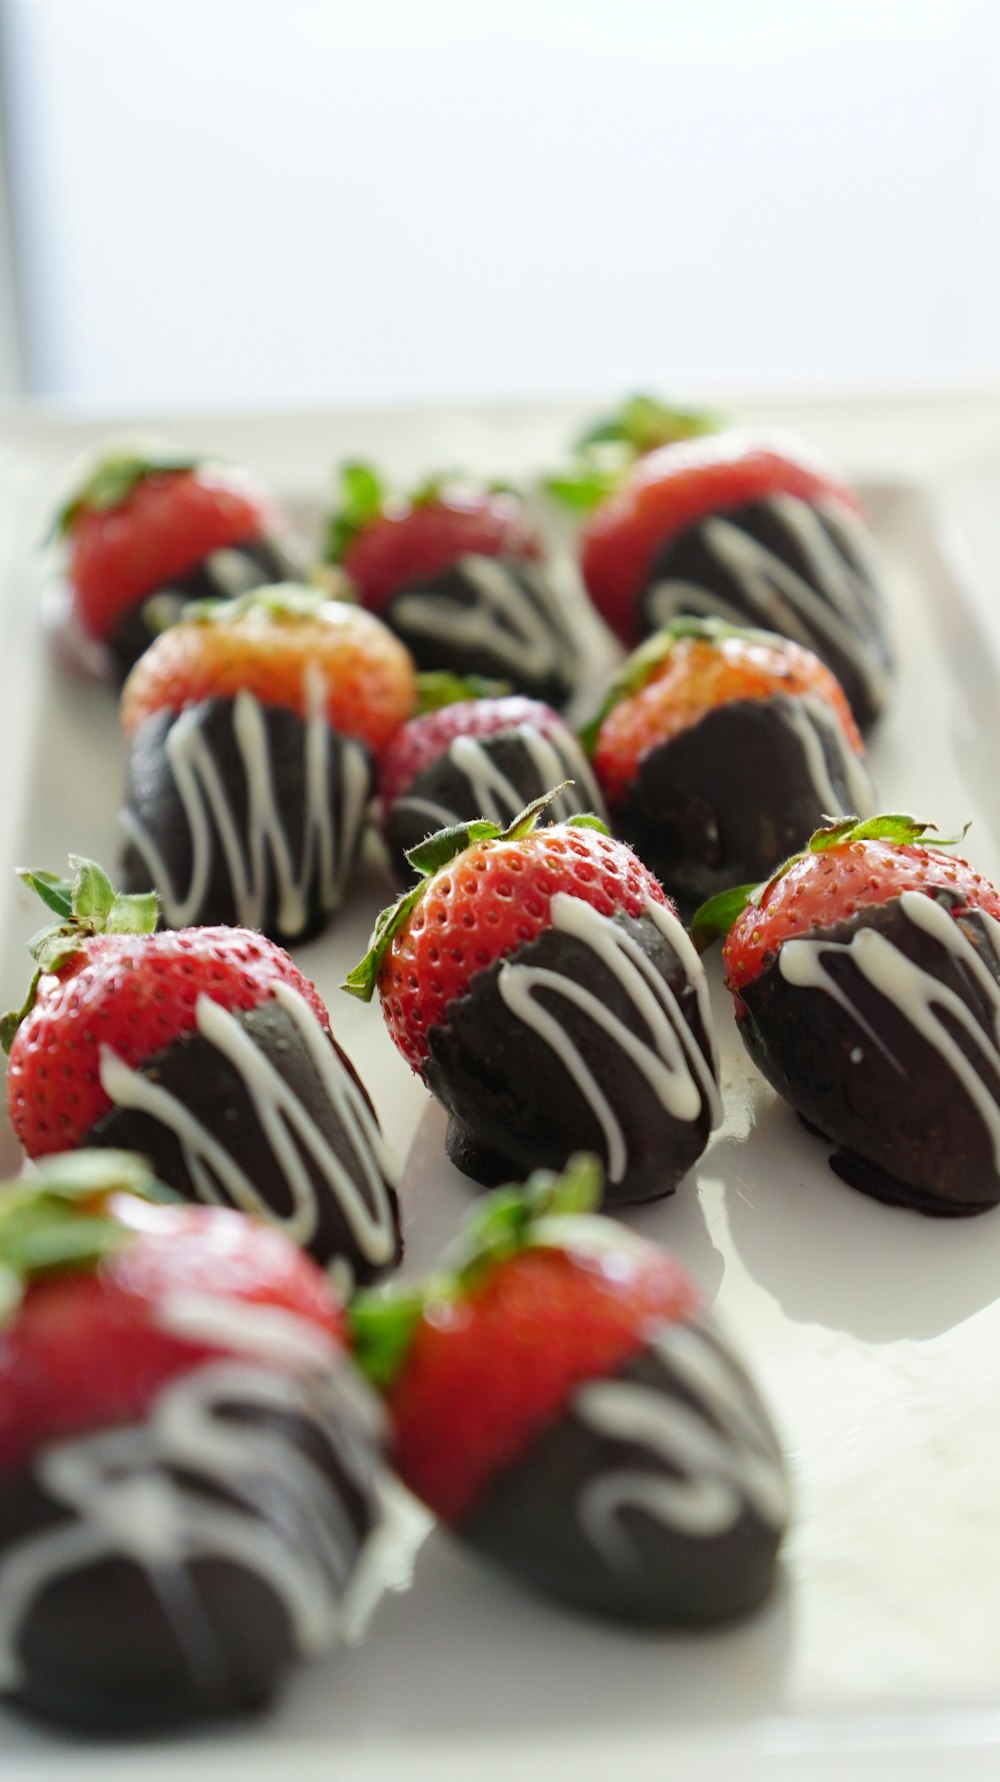 a plate of chocolate covered strawberries on a table